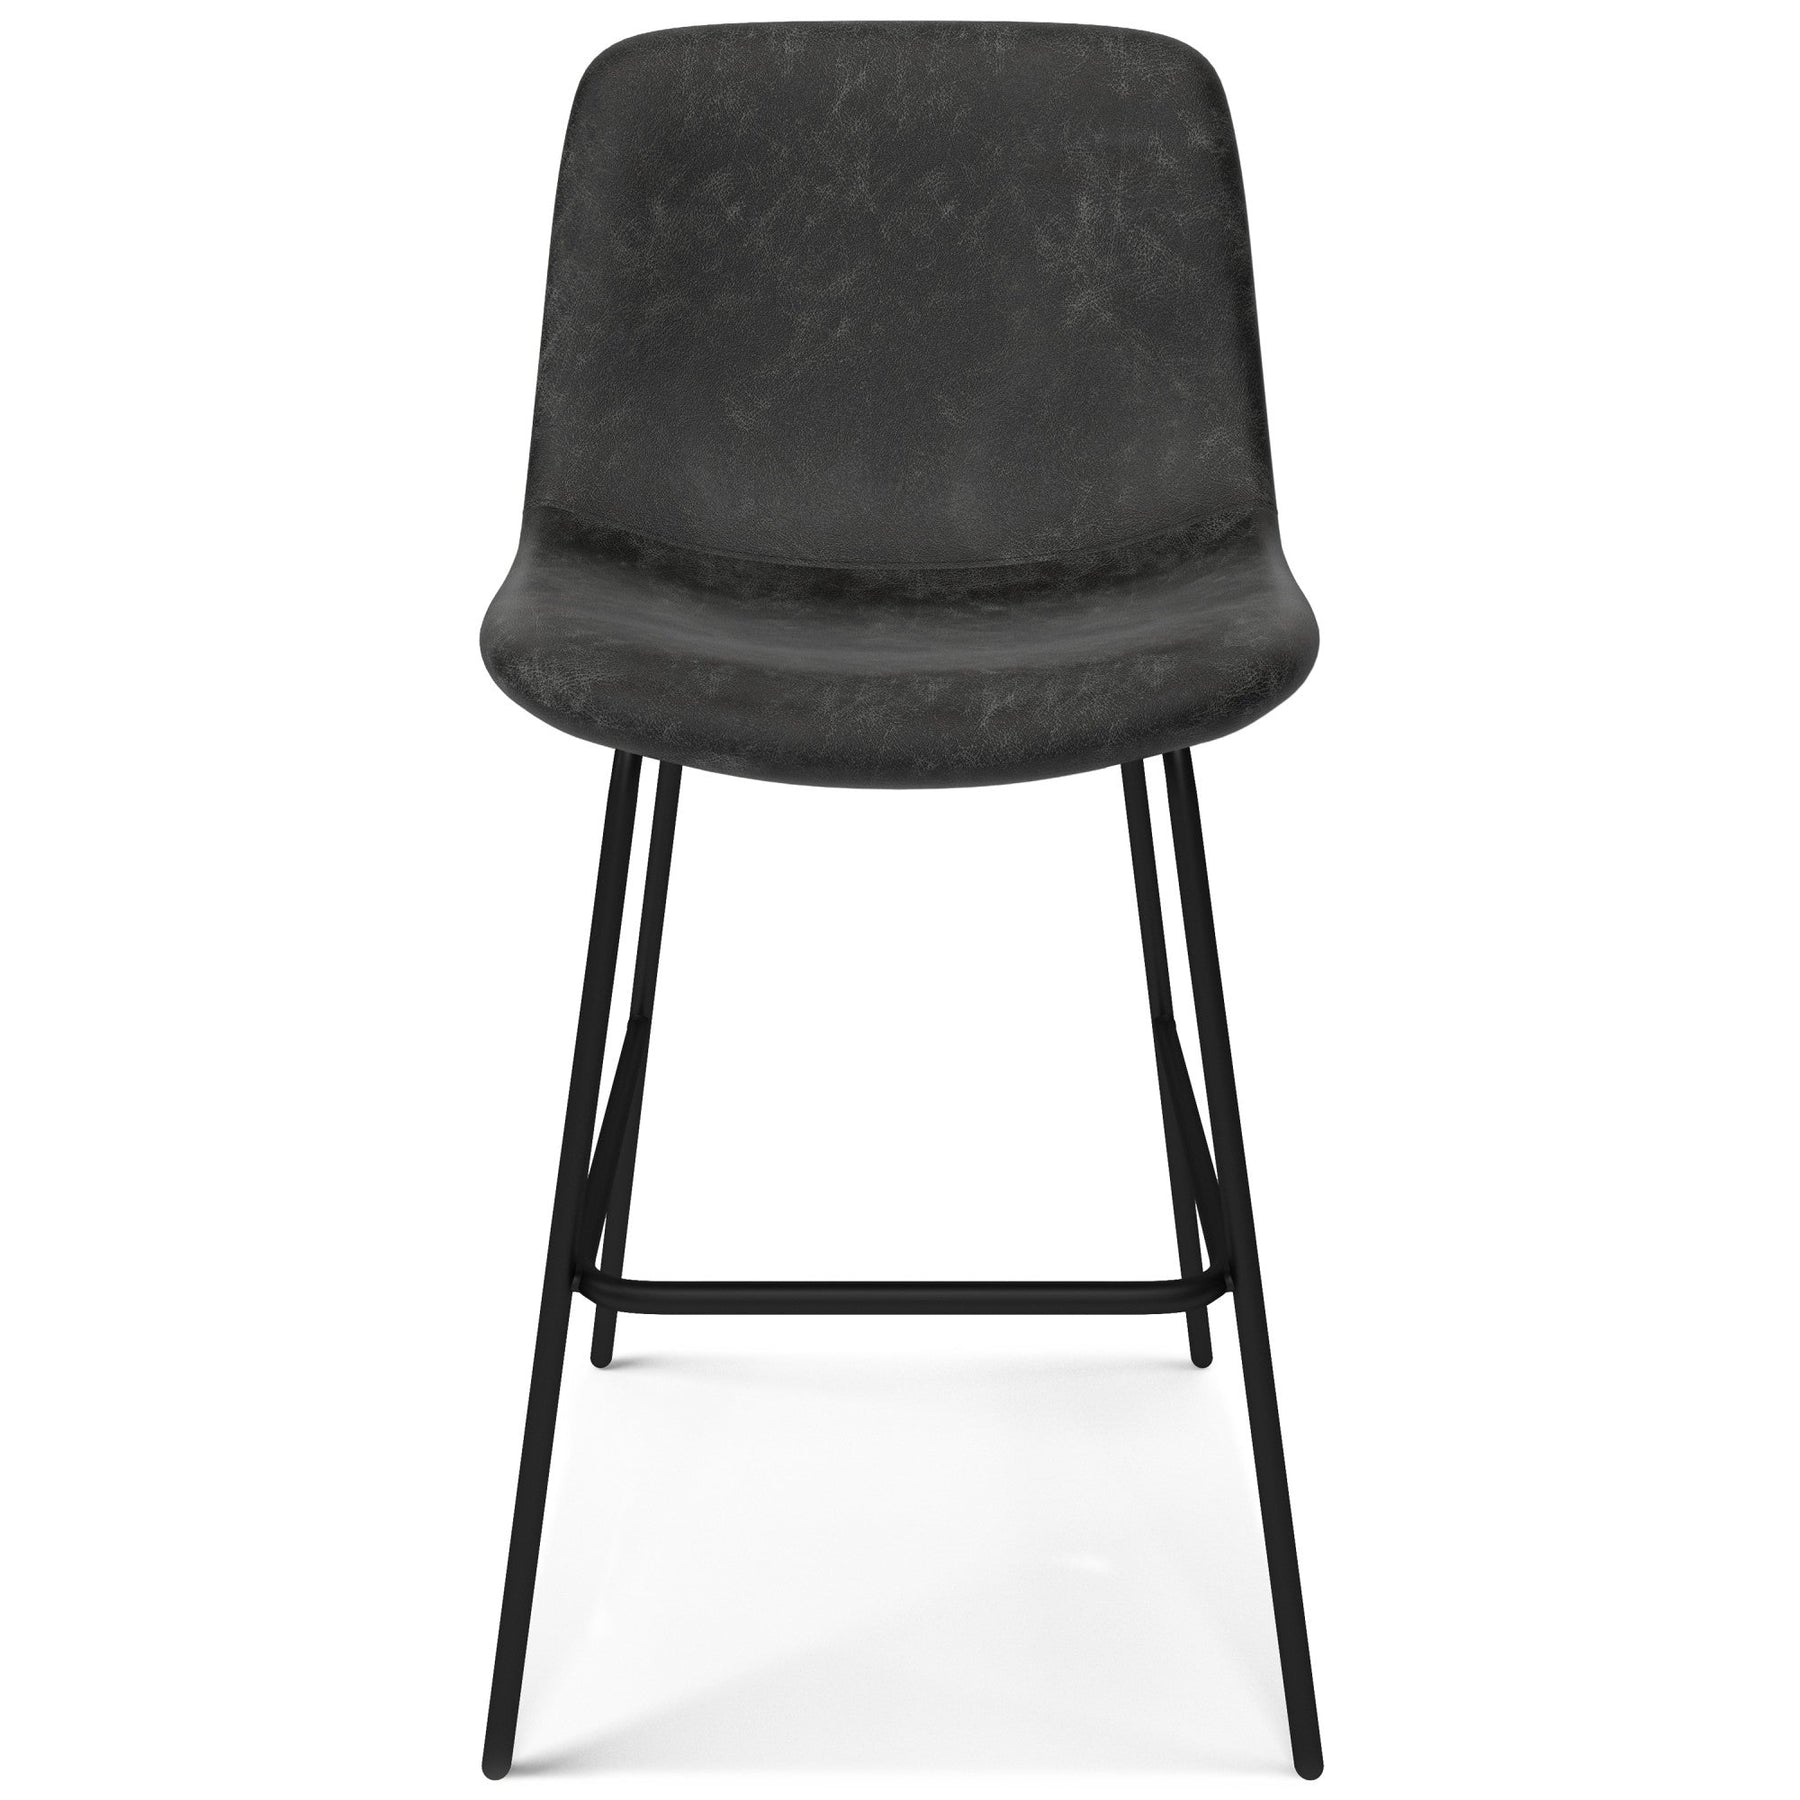 Distressed Charcoal Grey | Jolie Counter Height Stool (Set of 2)